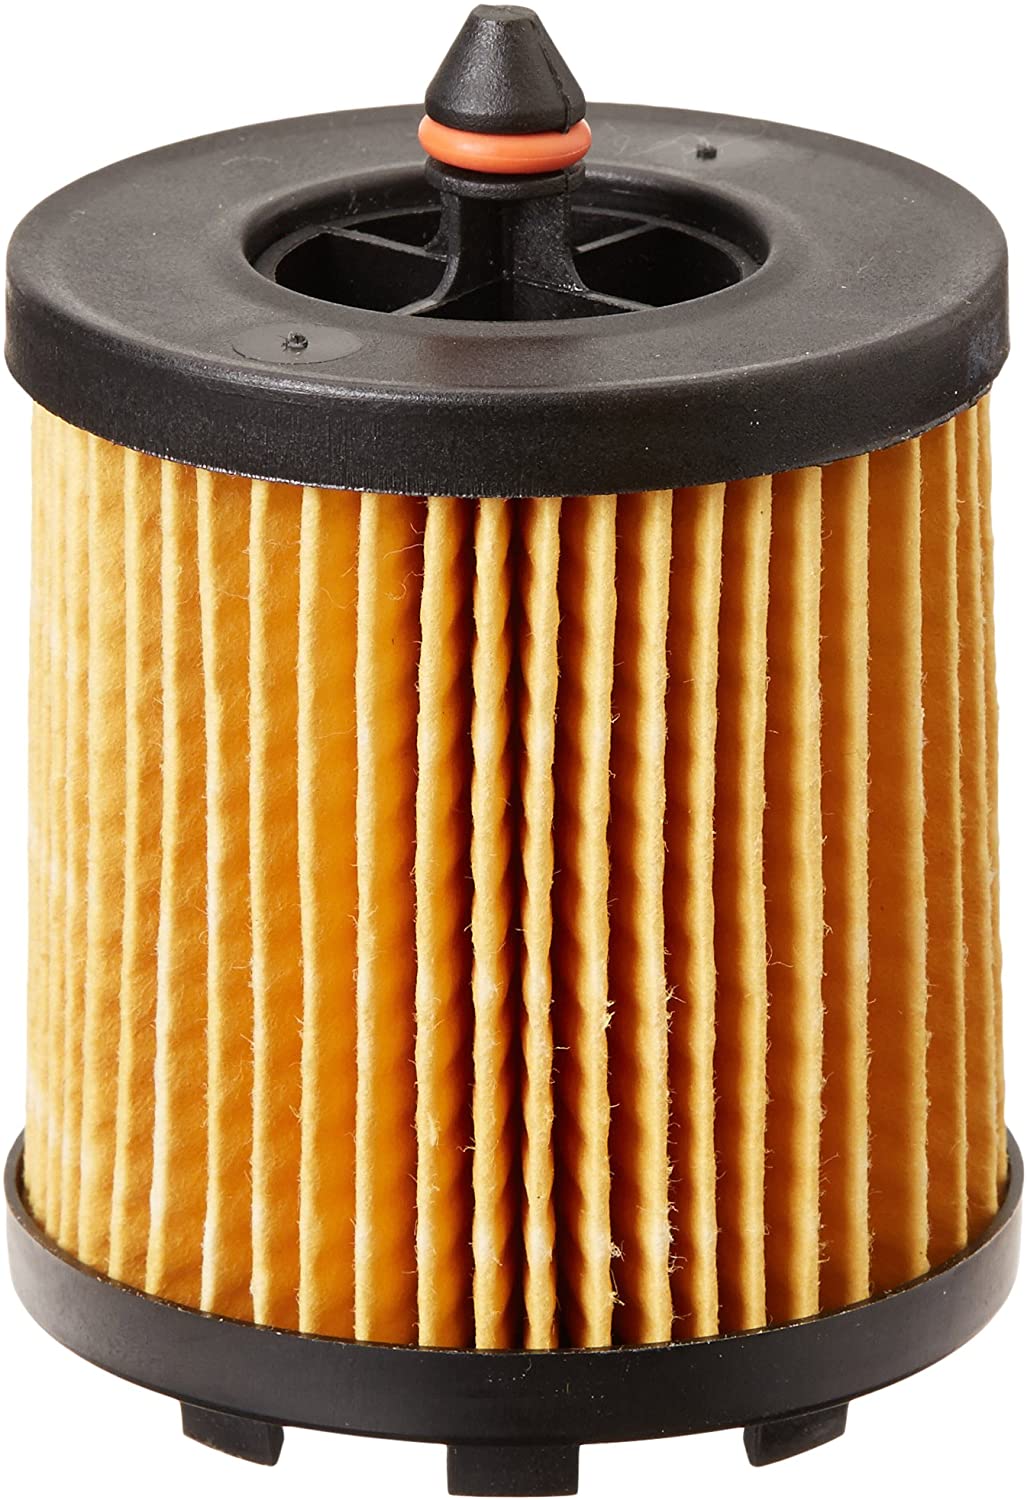 10 Best Oil Filters For Chevrolet Equinox Wonderful Engine